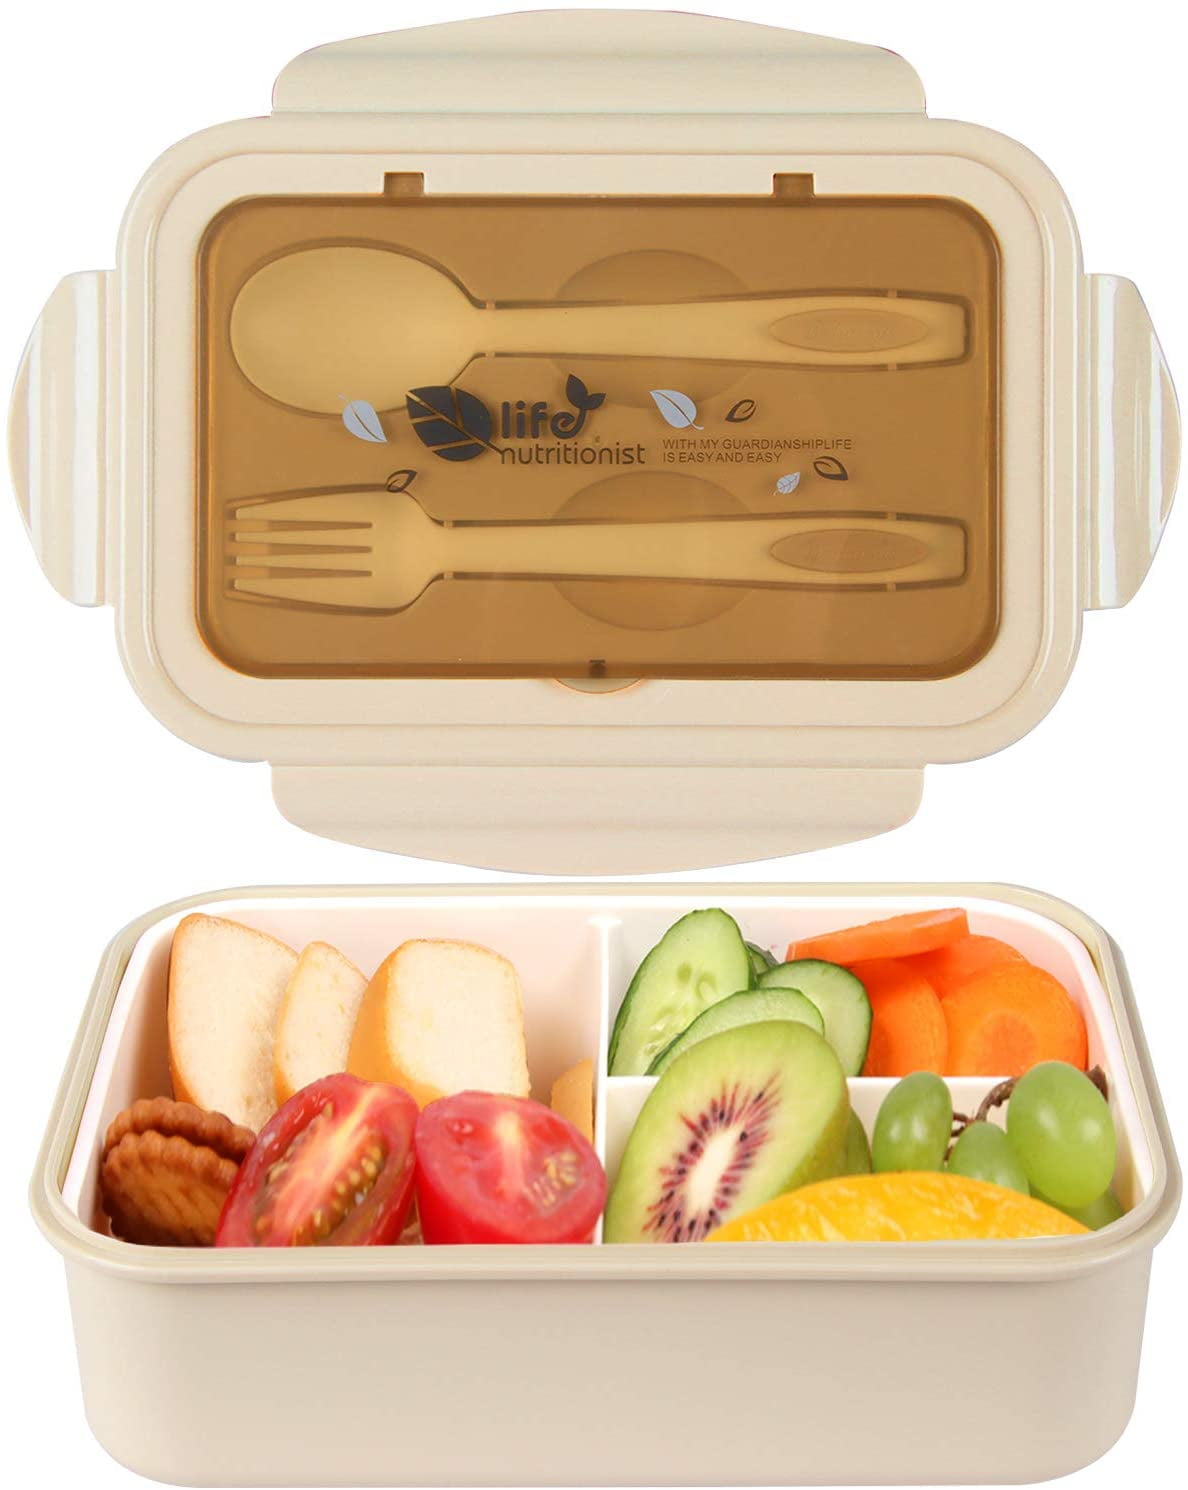 Green Dishwasher Microwave Safe Aoliandatong Bento Box Lunch Box with 3 Compartment and Cutlery Set Bento Lunch Box for Adults Kids BPA Free Meal Prep Containers 